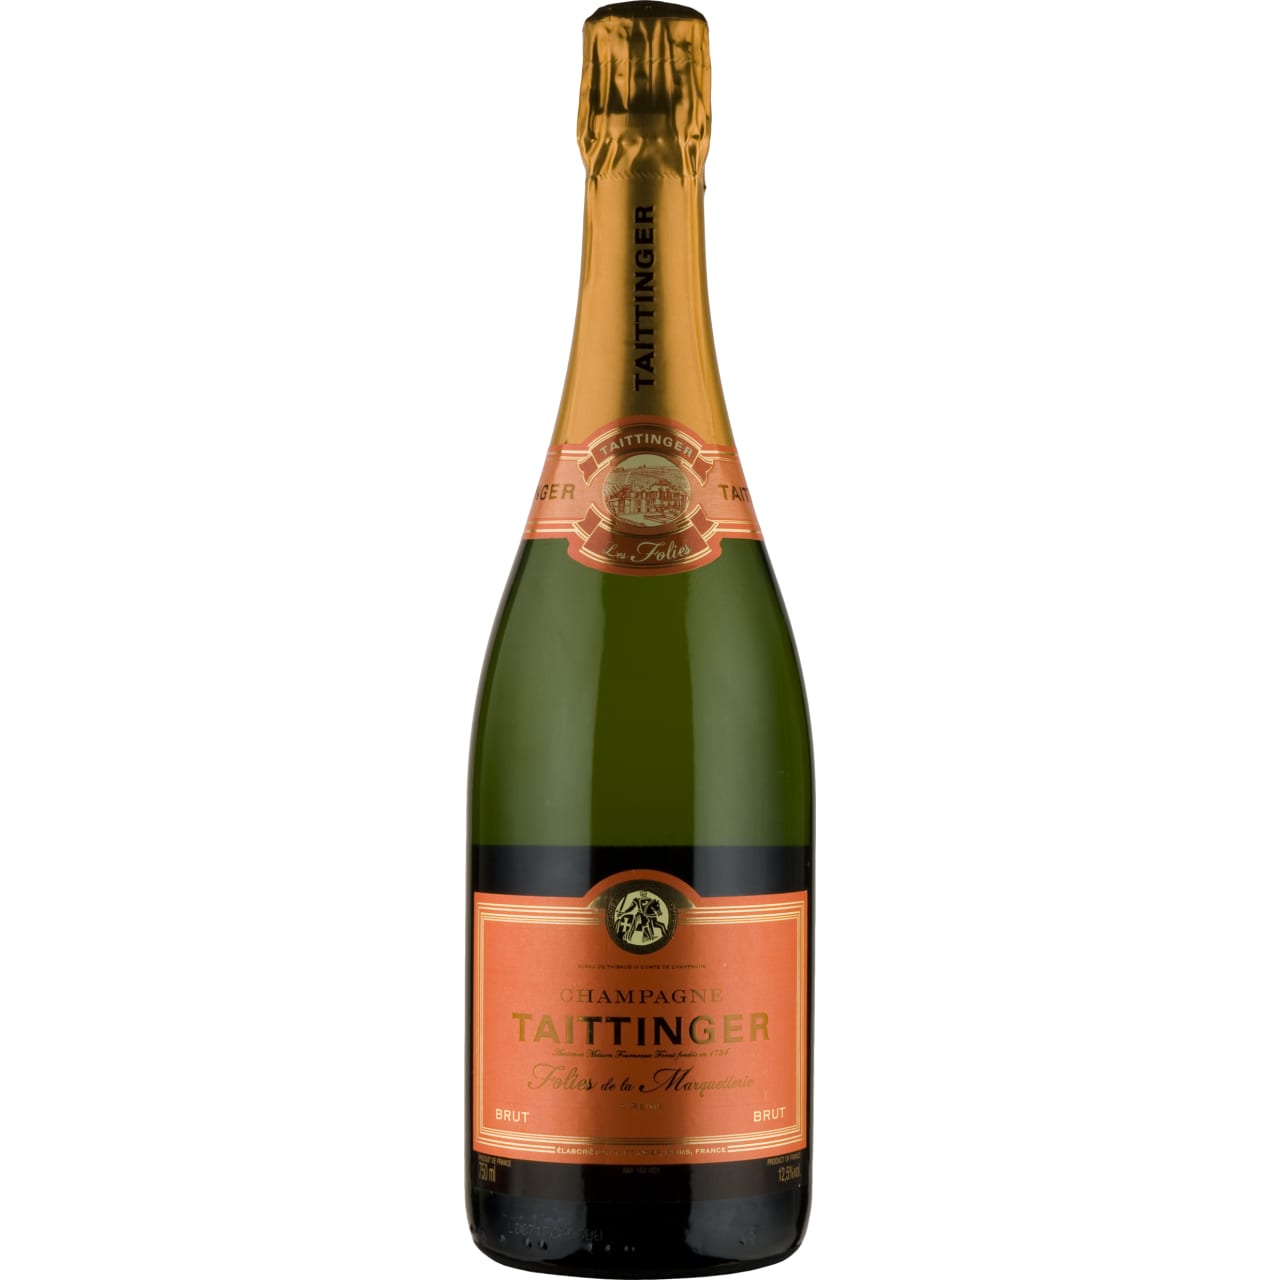 Folies Marquetterie NV Taittinger bubbles are fine and delicate. An intense, highly fruity bouquet leads onto peach and apricot jam aromas with subtle hints of toasted brioche and vanilla.